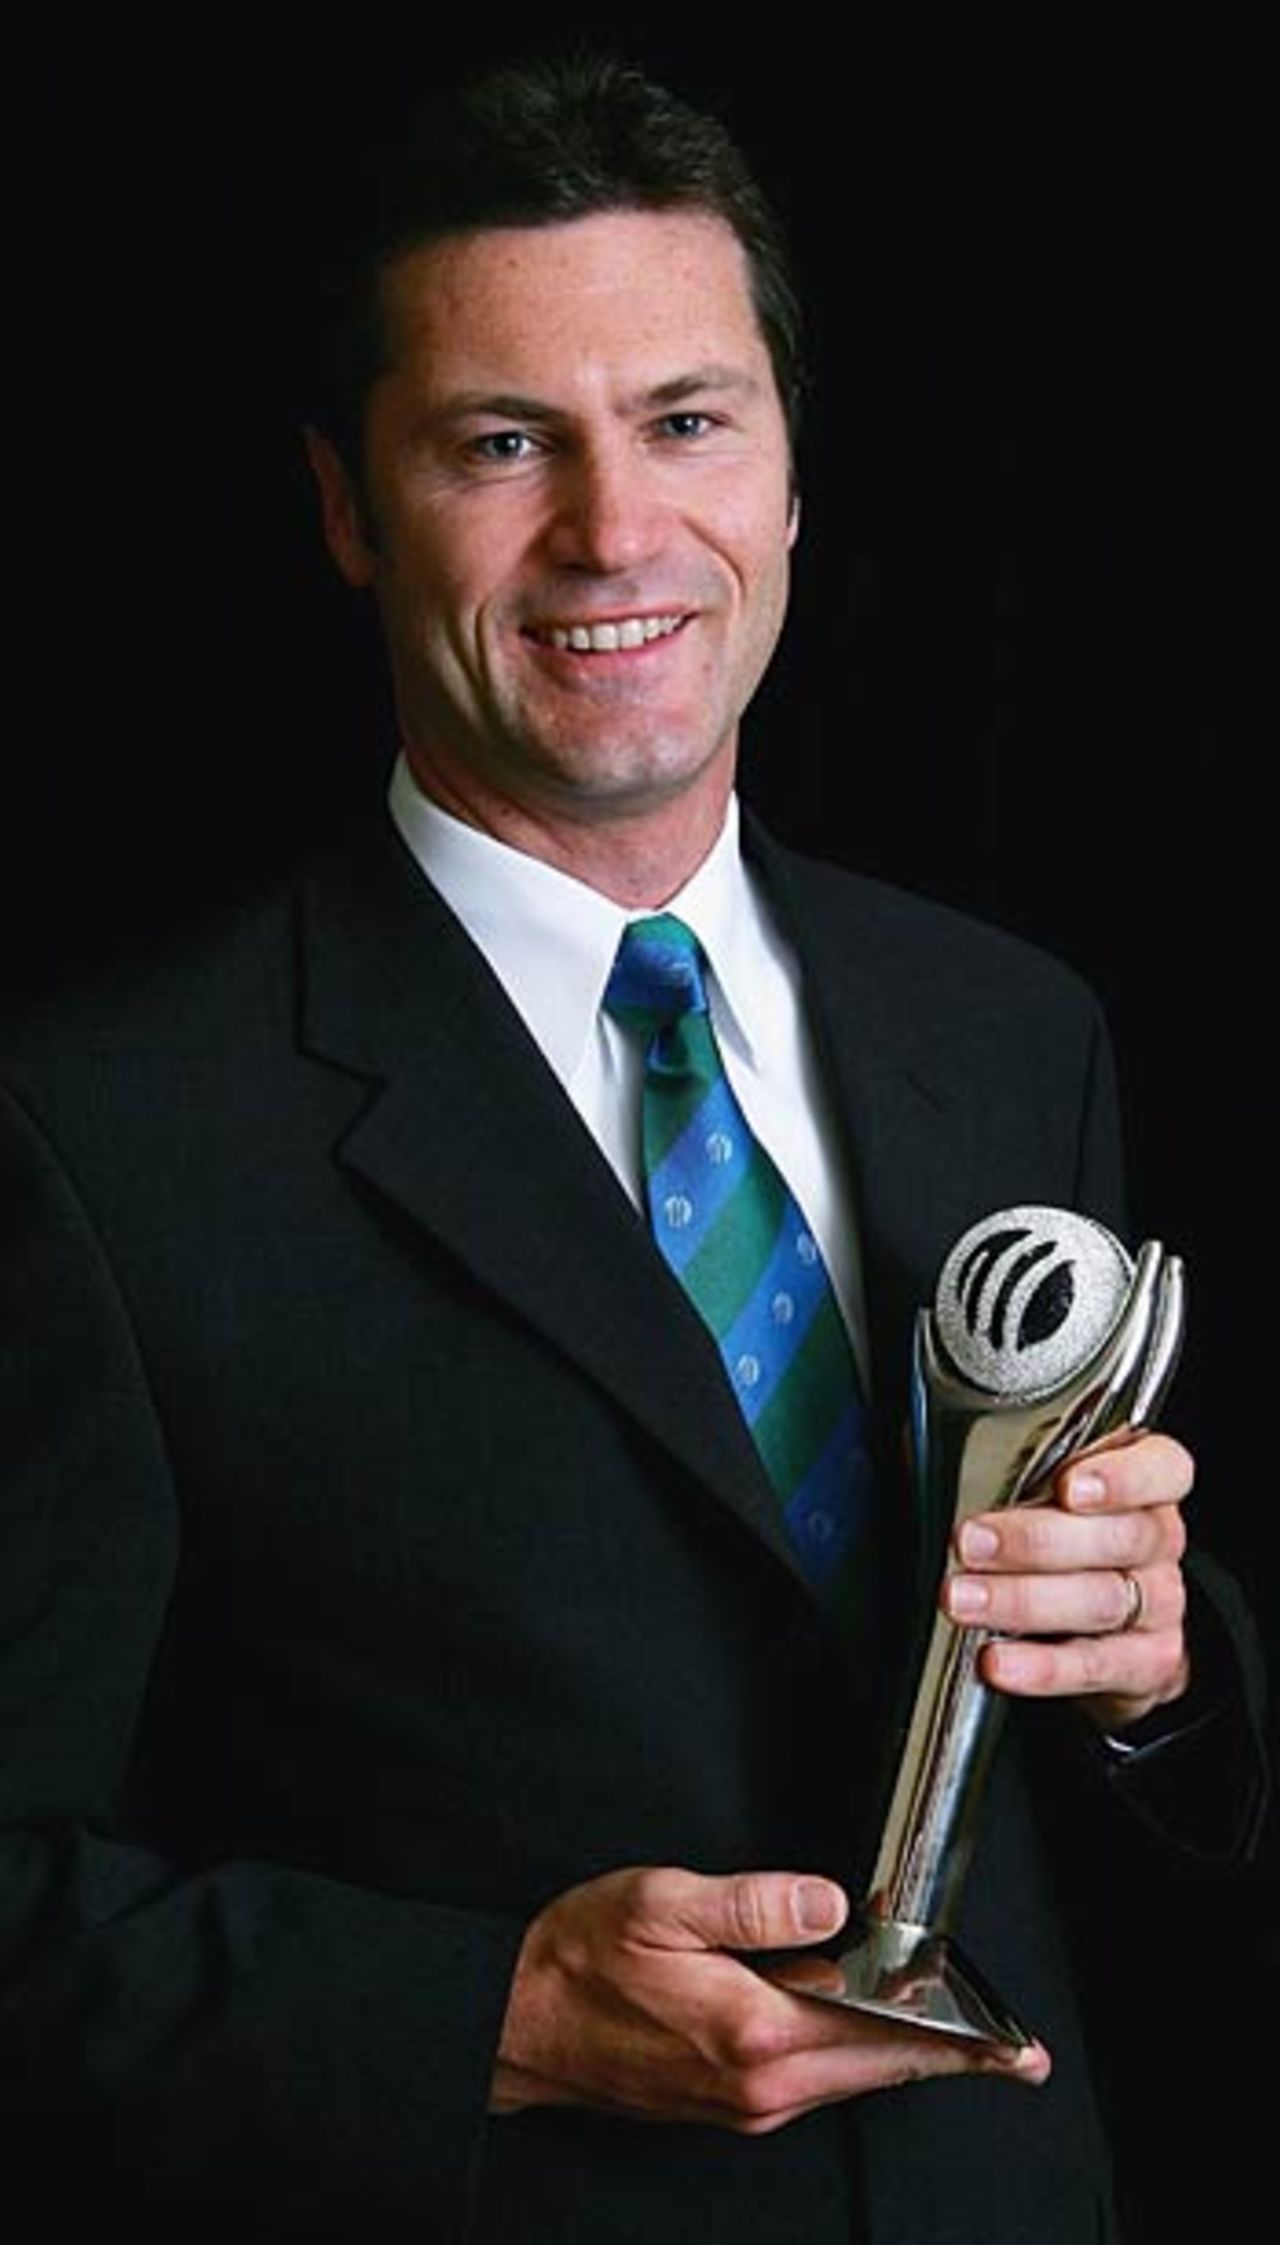 Simon Taufel has been named the Umpire of the Year for second successive year at the ICC awards dinner, Sydney, October 11, 2005